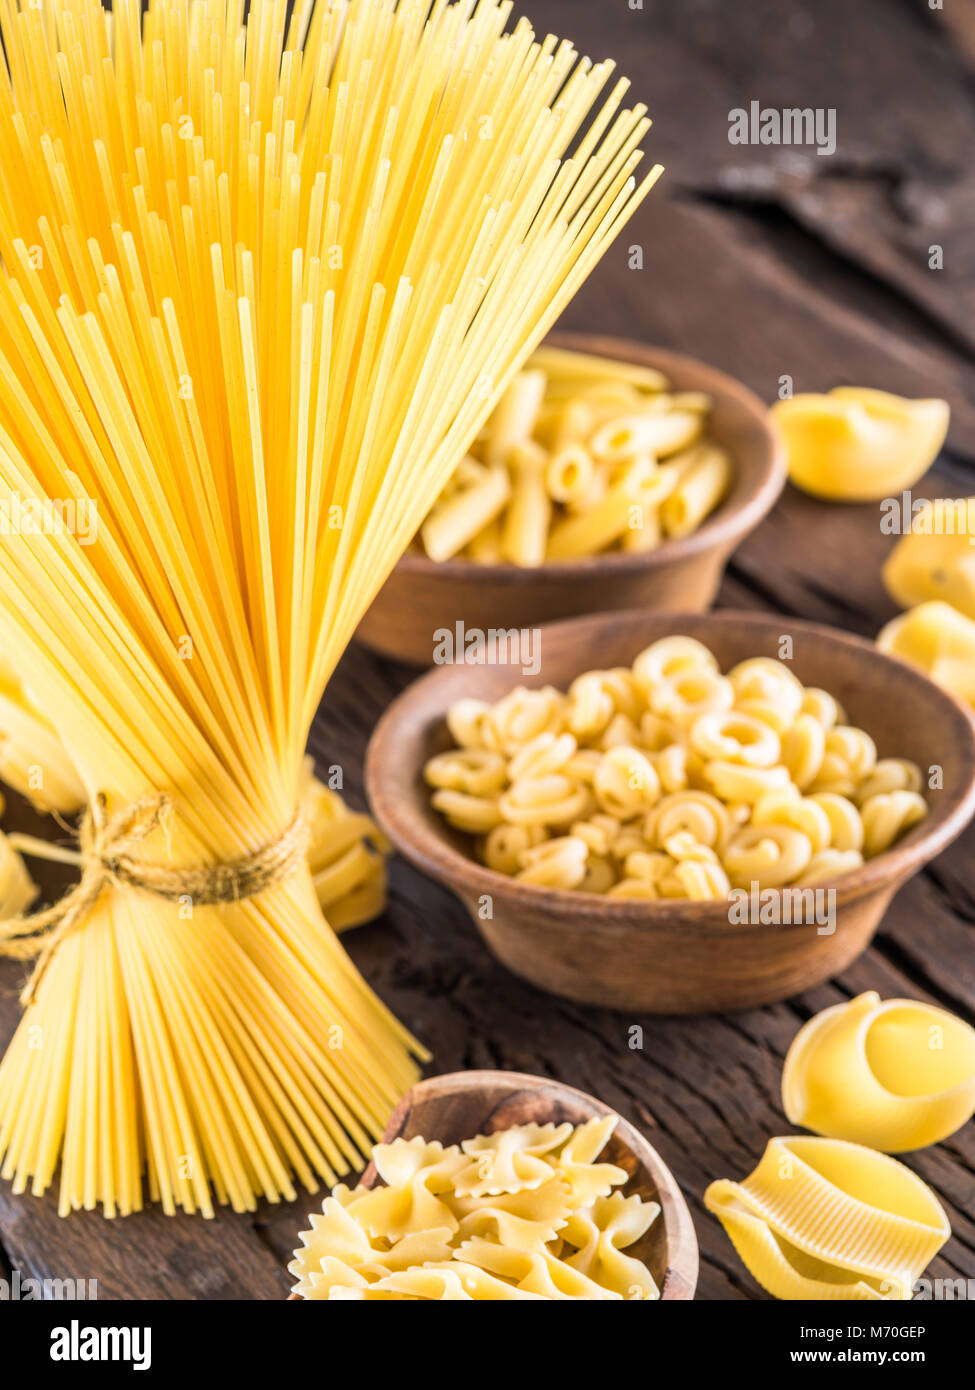 Different pasta types on wooden table. Stock Photo